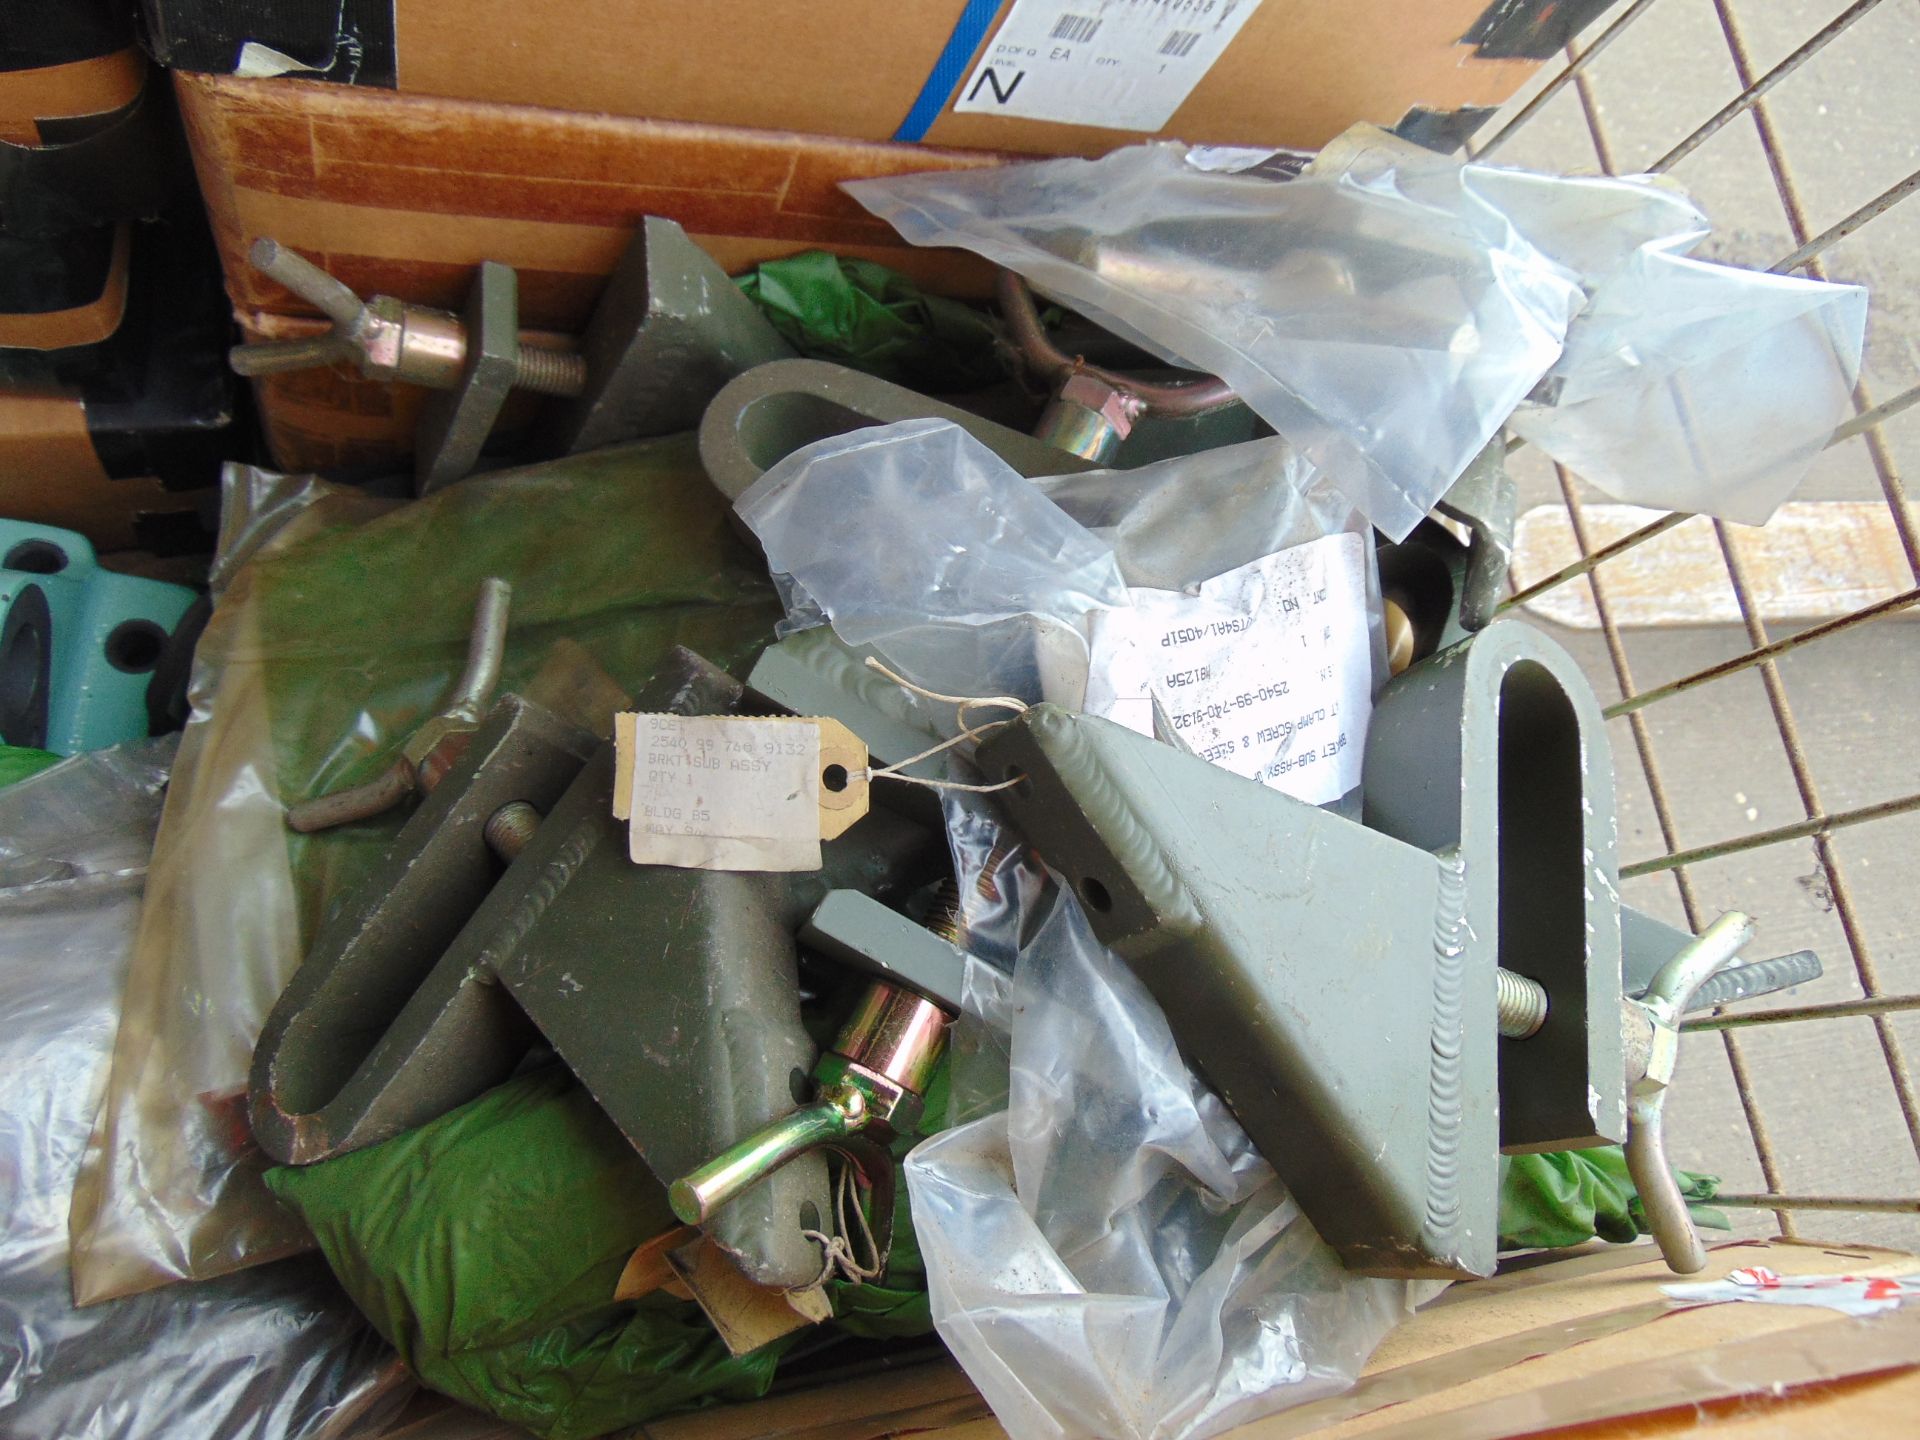 1 x Stillage New Unissued (CET) Combat Engineer Tractor Spares inc Brake Bands, Gears Spares etc - Image 9 of 10